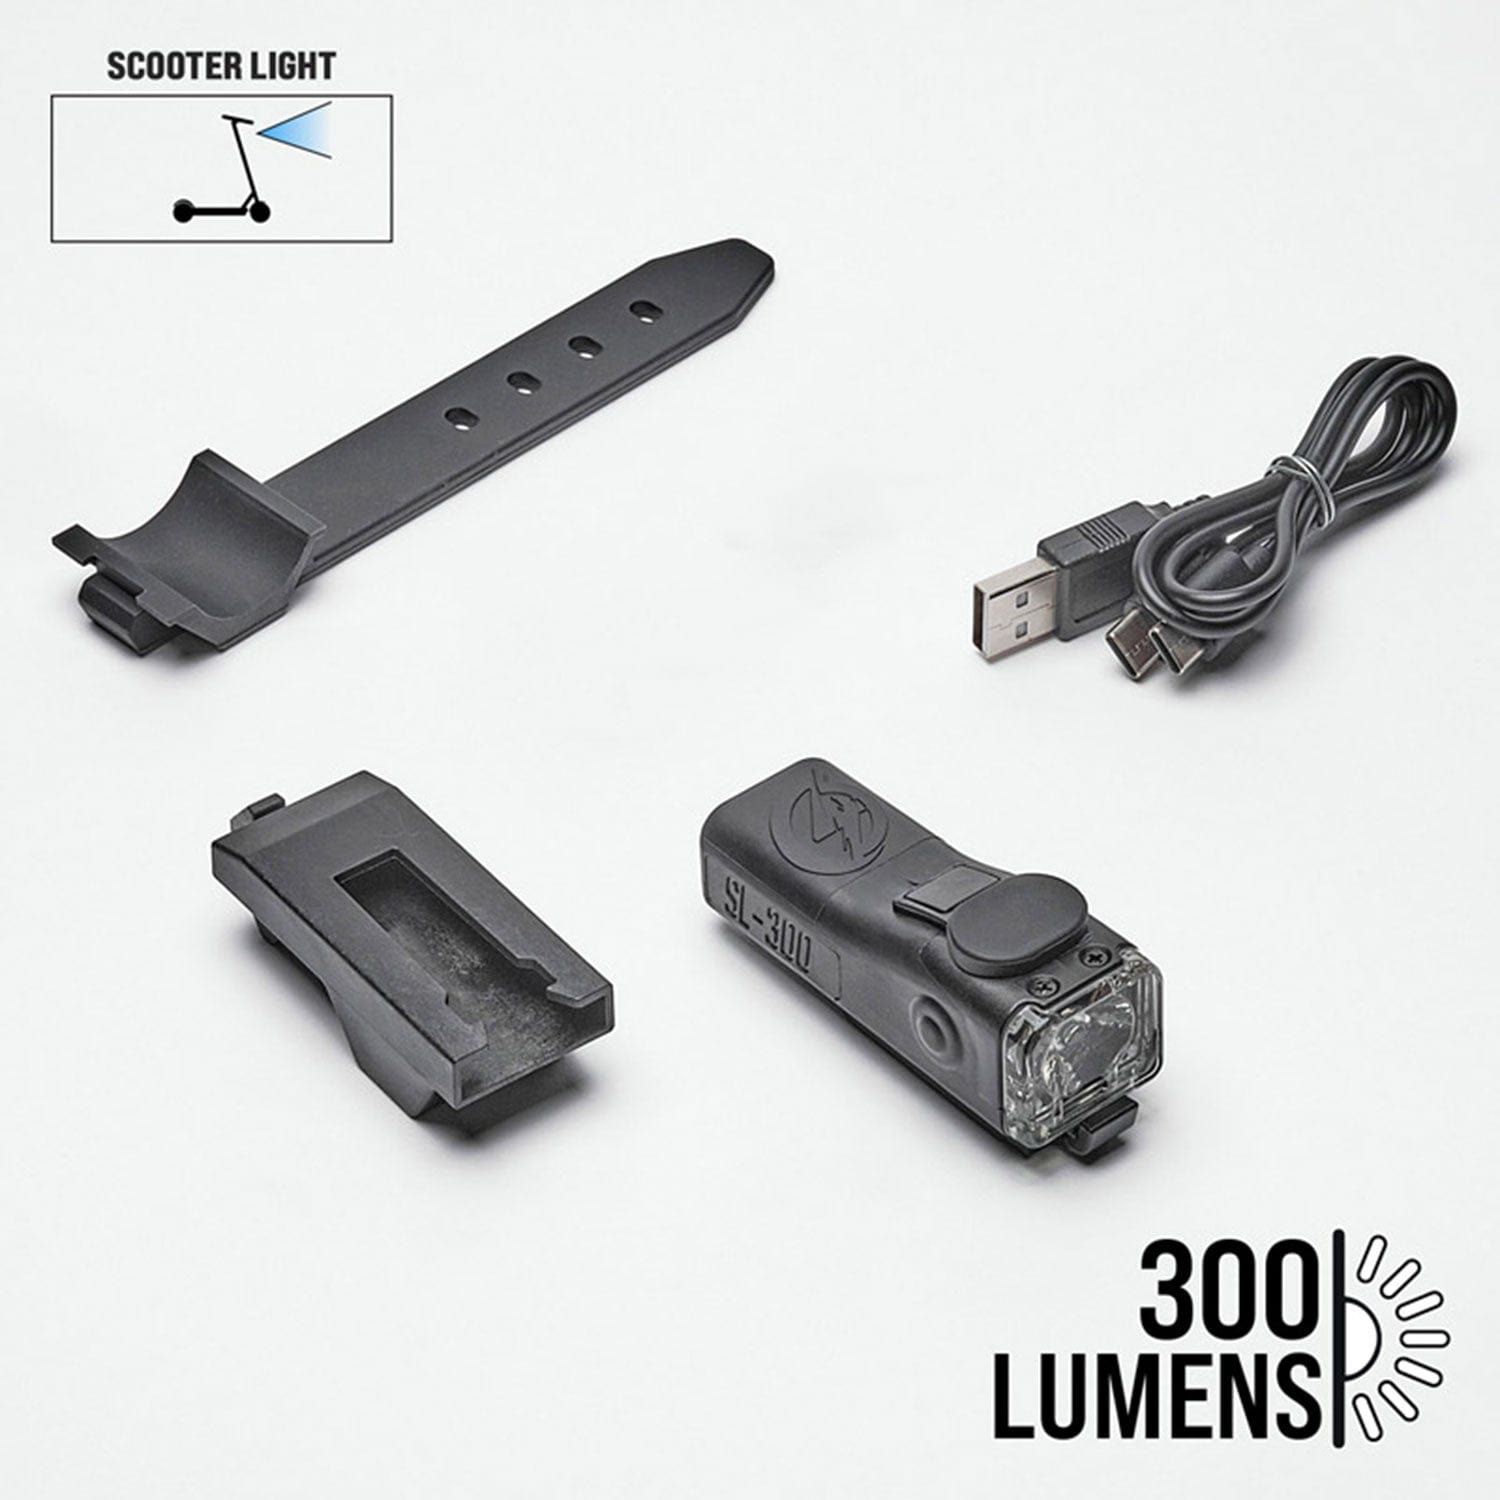 SL-300 Scooter Single Pack